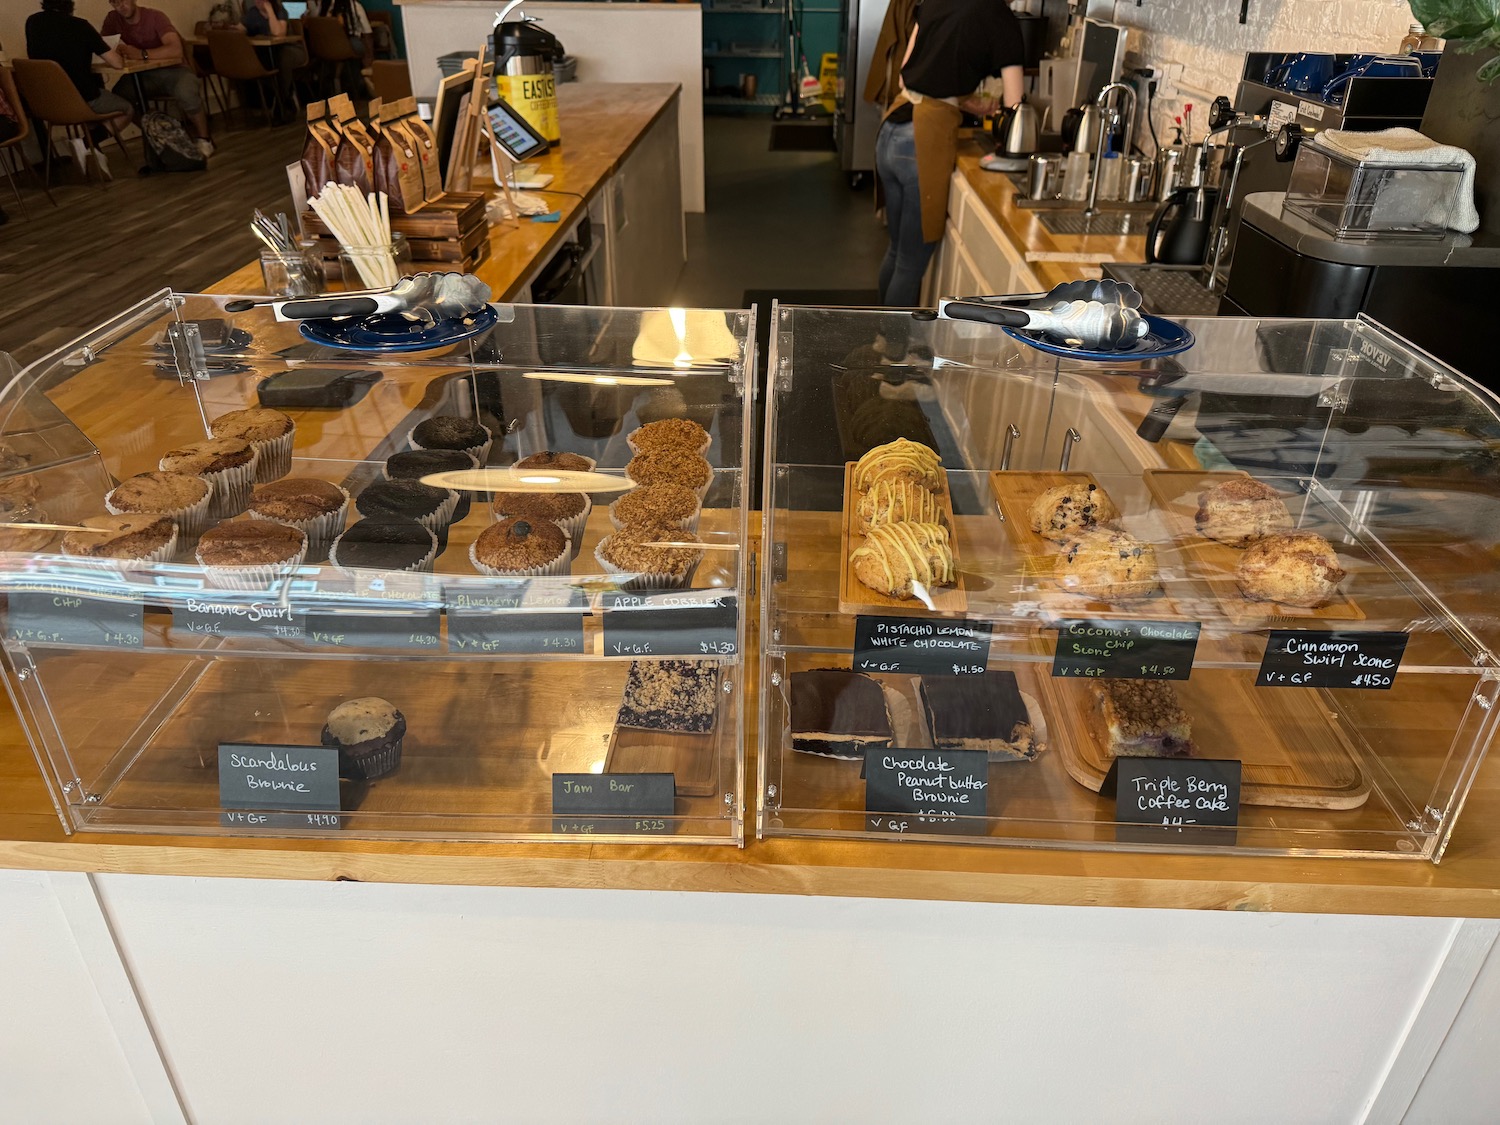 a display case of pastries